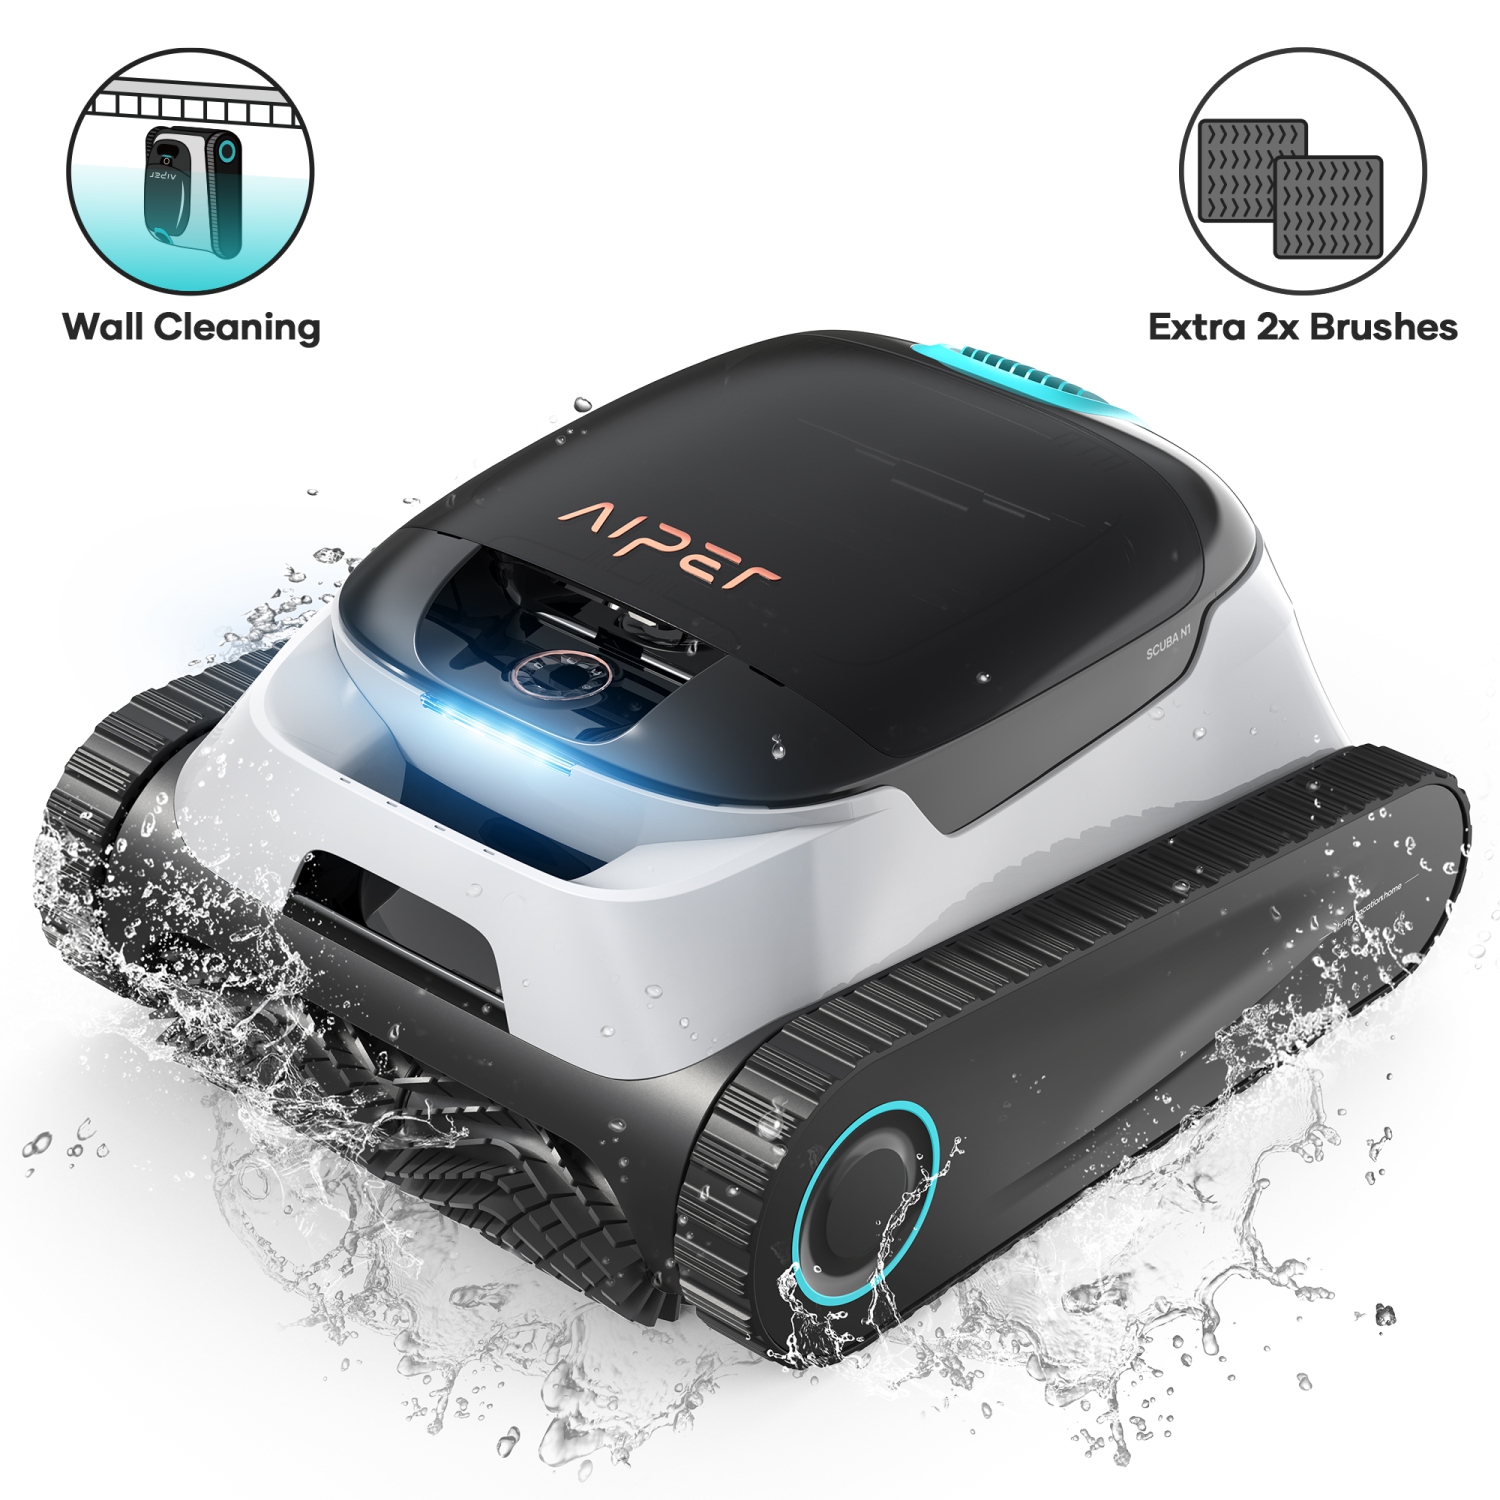 Aiper Scuba N1 - Cordless Robotic Pool Cleaner for In-Ground Pools up to 1600sq.ft, Automatic Pool Vacuum, Lasts 150 Mins